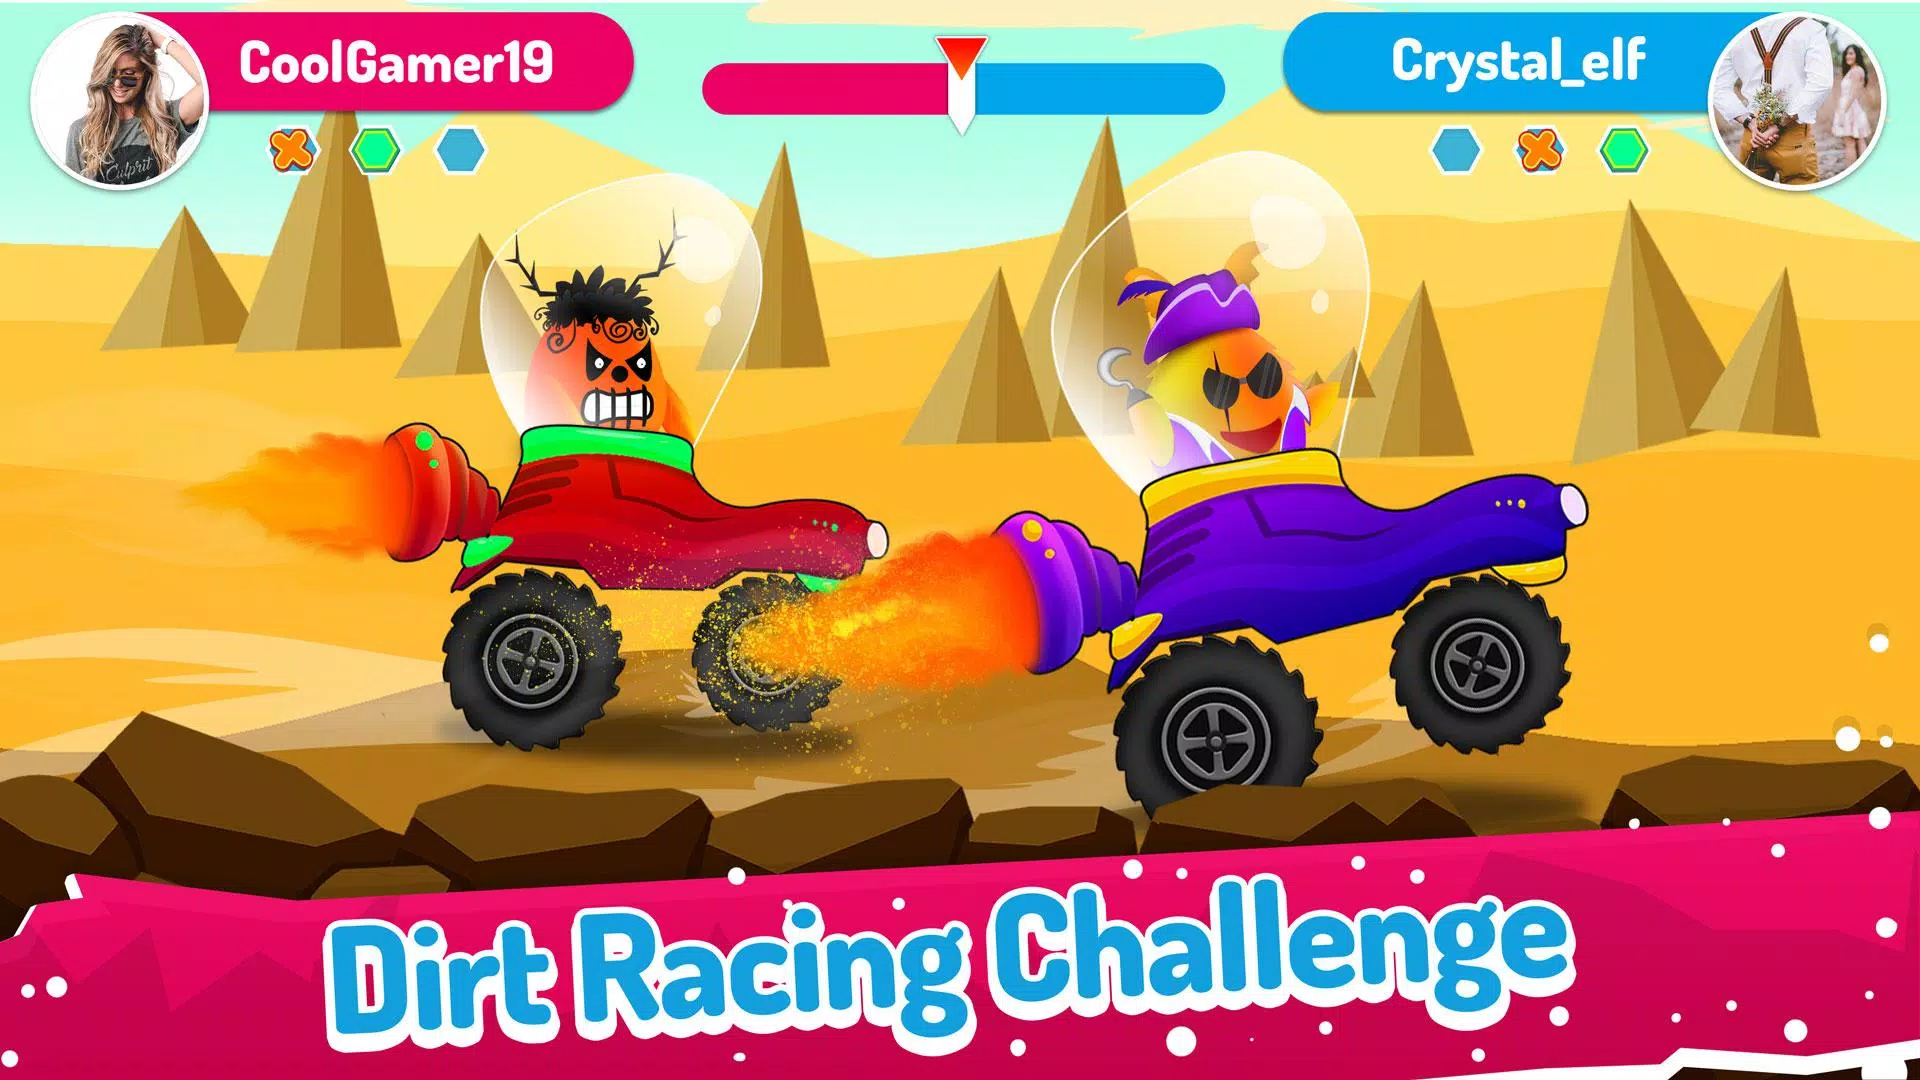 2 Player Games: The Challenge APK v5.9.9 Free Download - APK4Fun